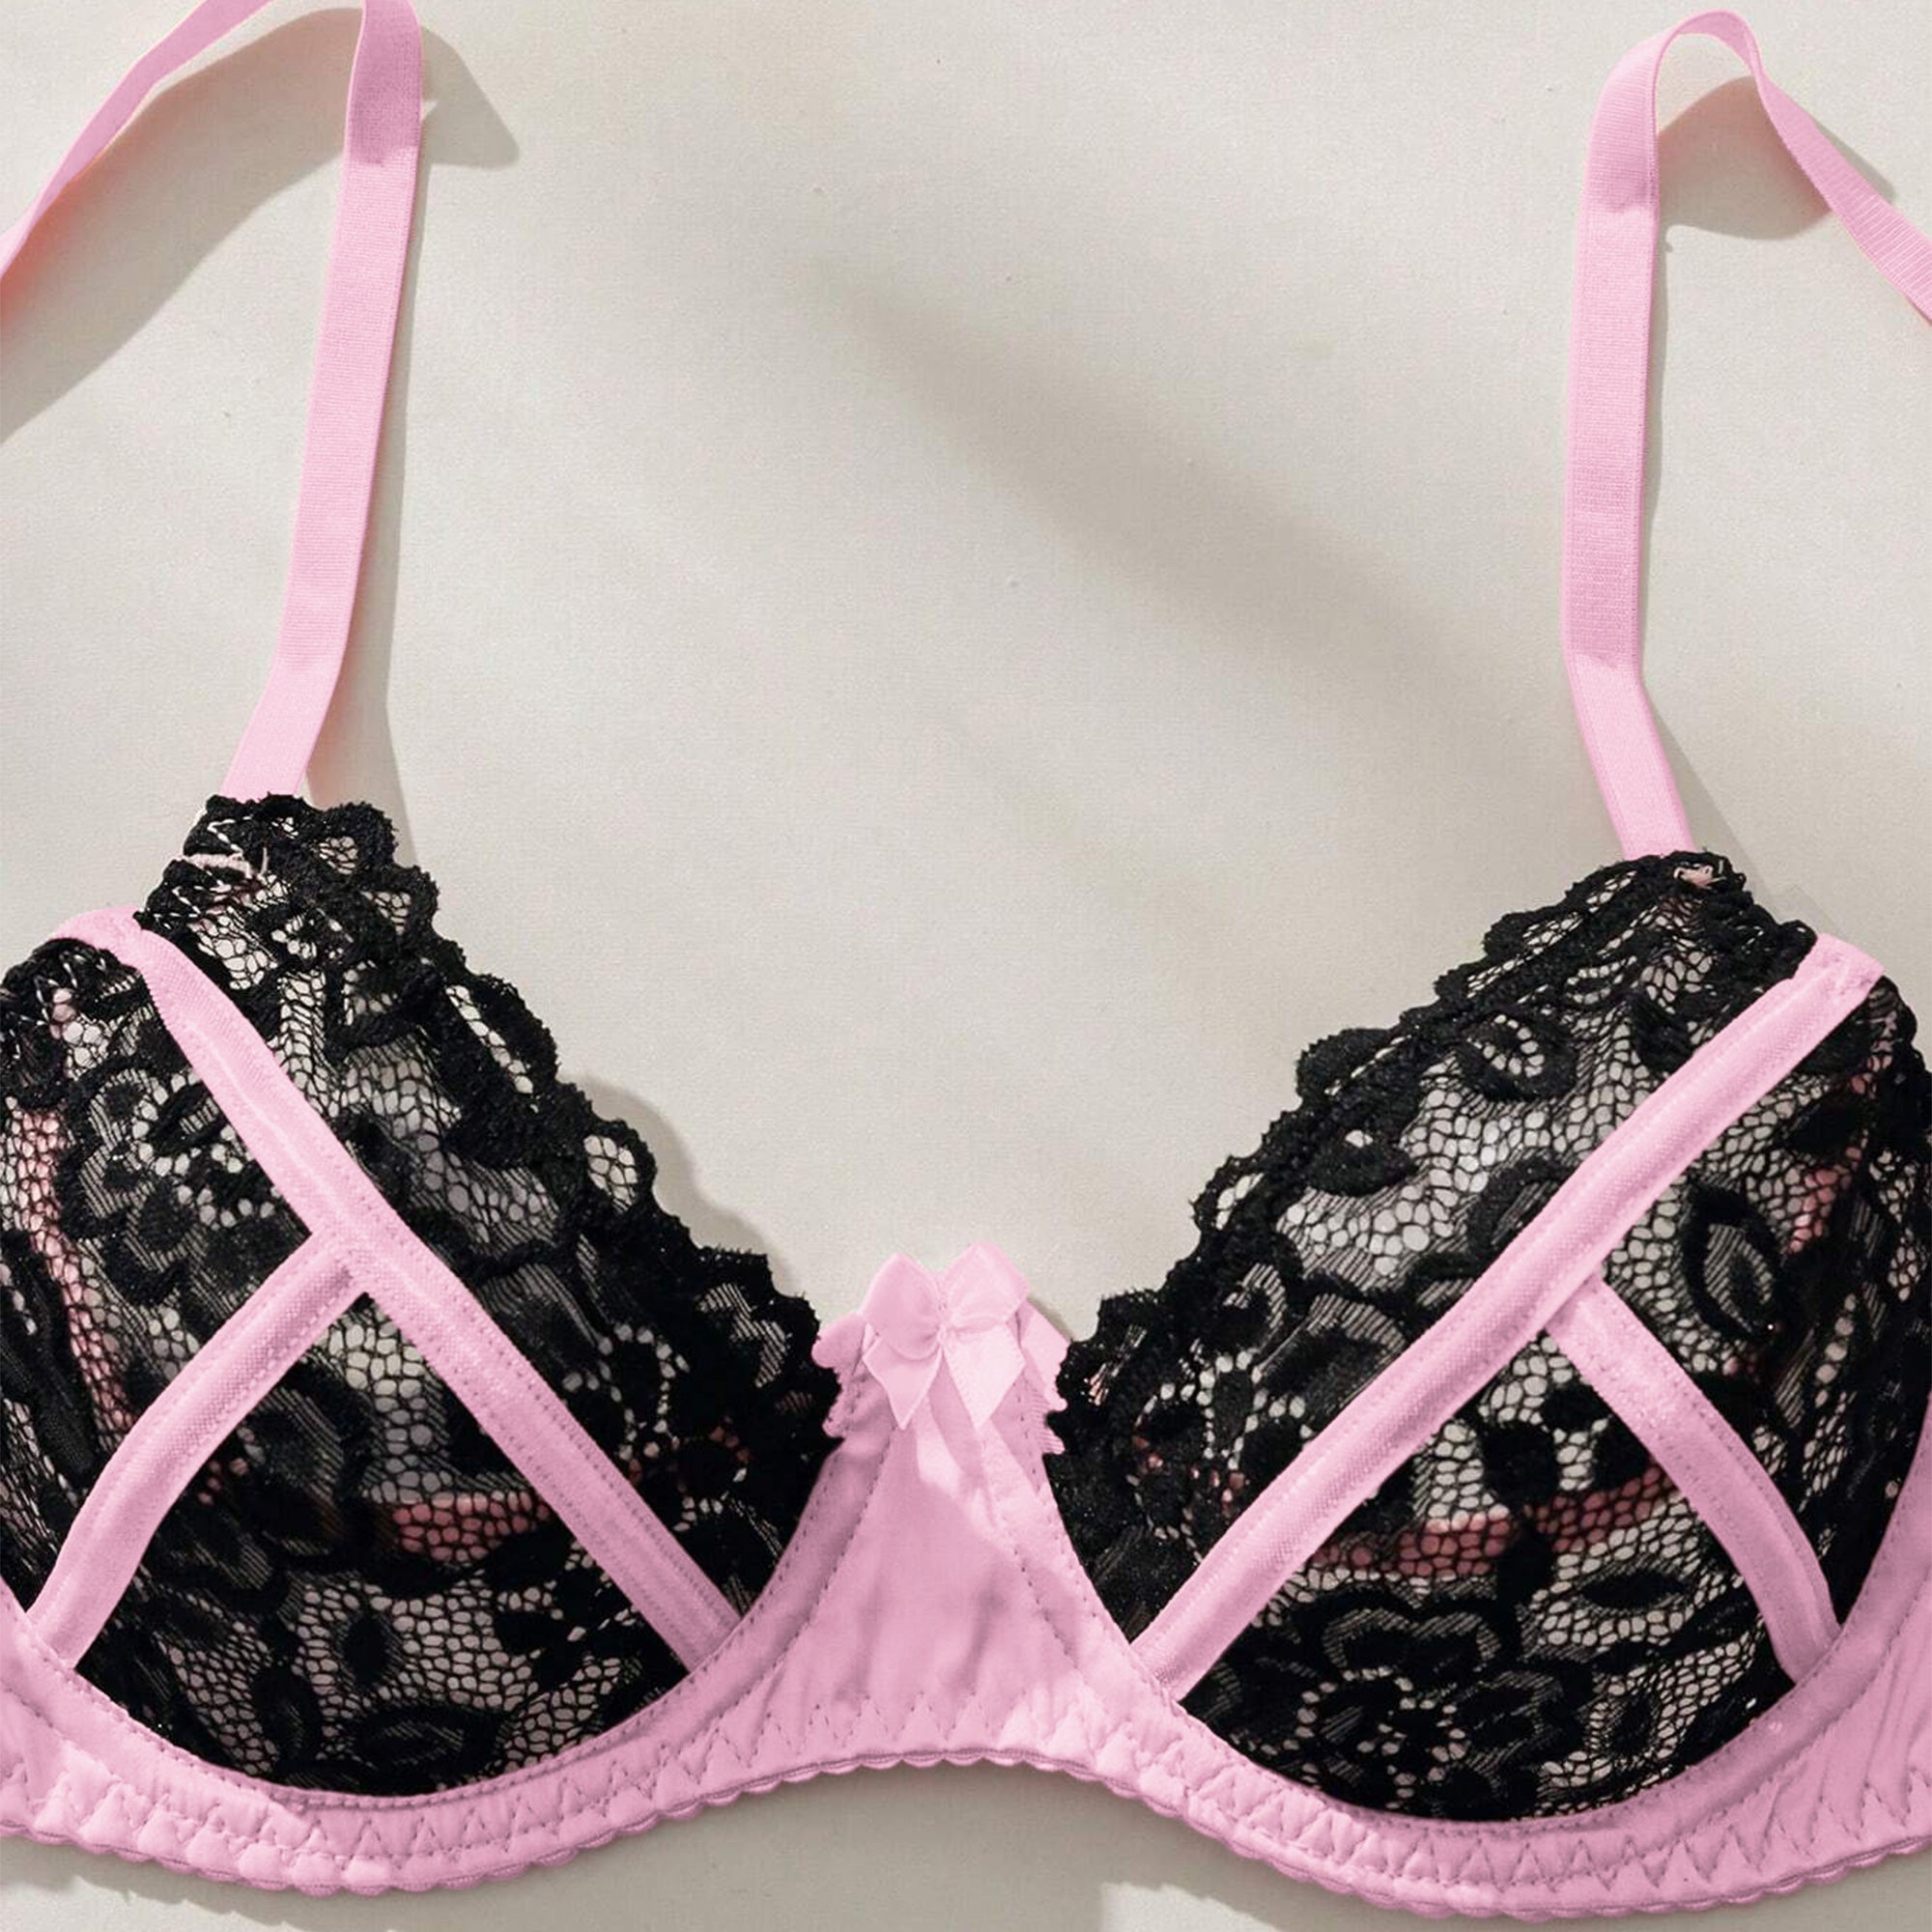 Victoria's Secret 32D Extra Small Bra sets Victoria's Secret 32D x Small  Bra Set Bundle of 2: 1 32D Push Up Bra and Extra Small Thong Pink